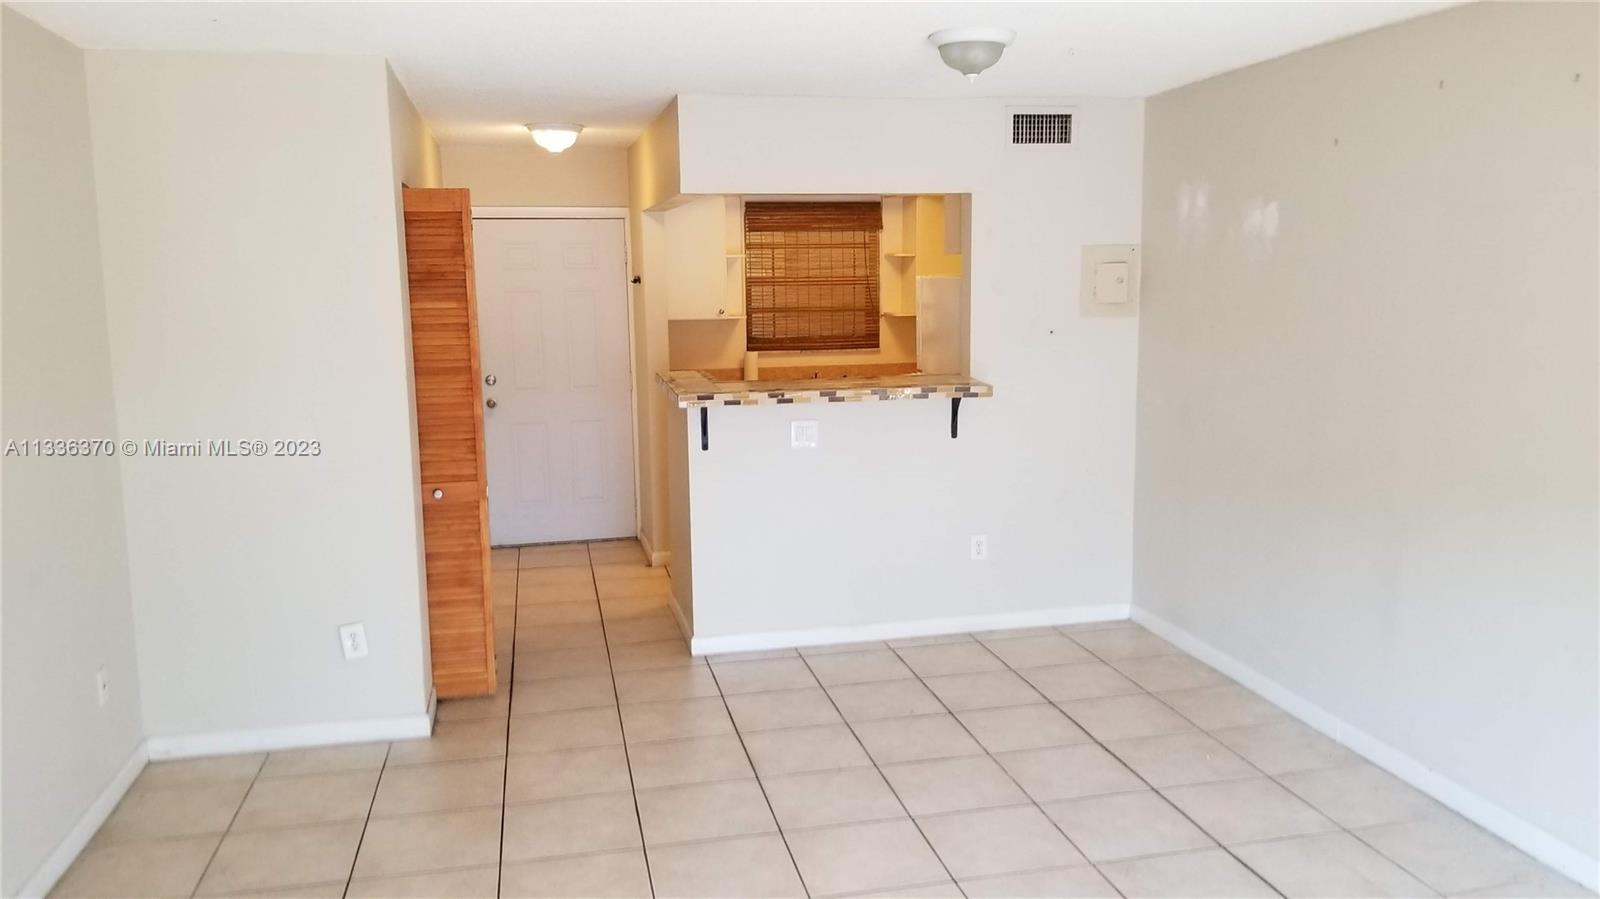 FRESHLY PAINTED, BEAUTIFUL LOFT, ONE BEDROOM APARTMENT, TILE FLOORS CLEAN, WITH BALCONY GATED COMMUNITY, MUST HAVE GOOD CREDIT.-